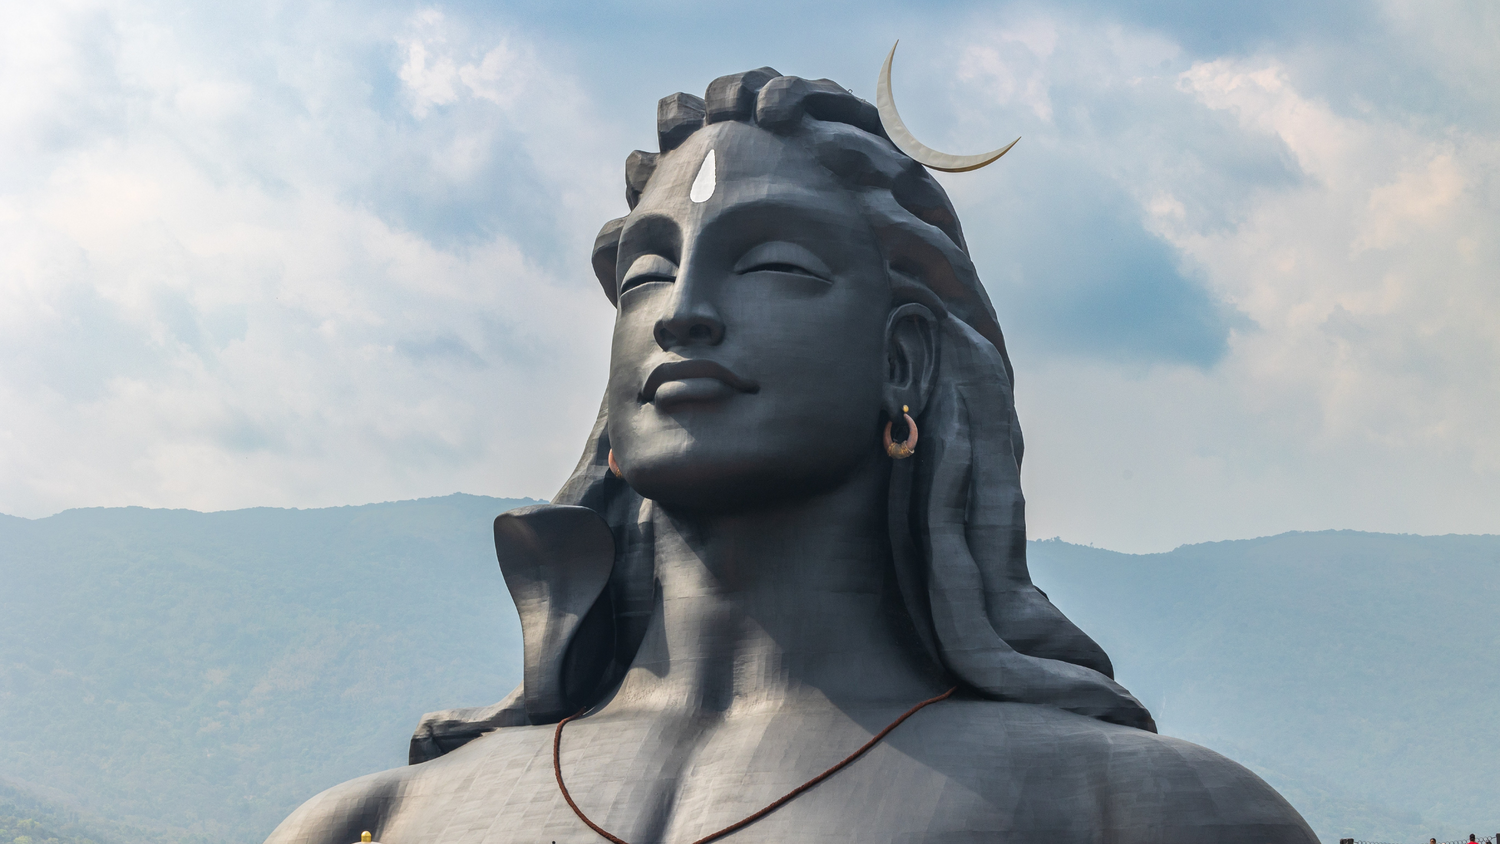 Who are lord Shiva's father and mother?